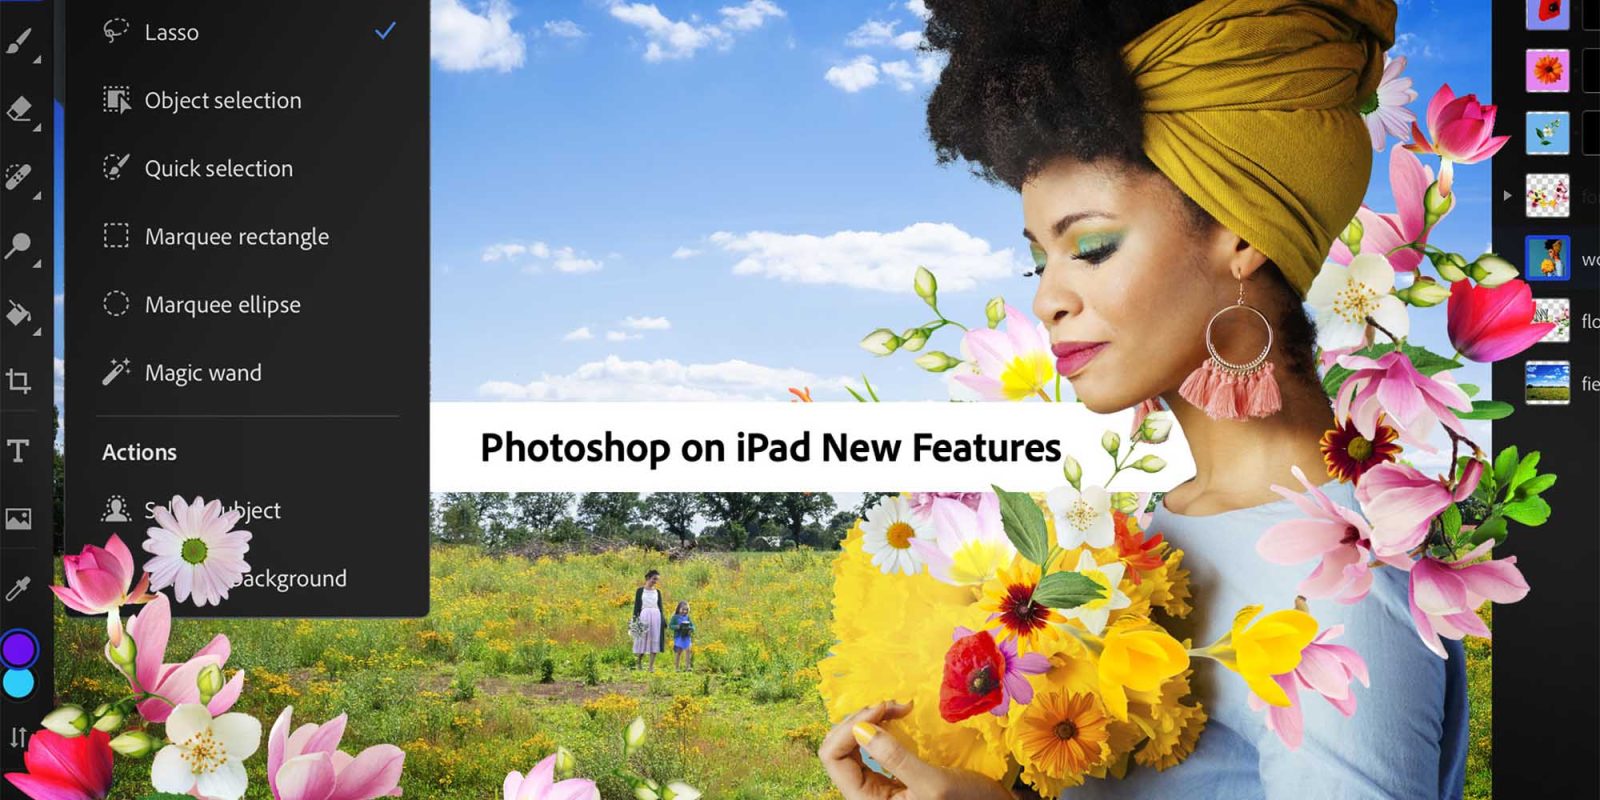 Photoshop for iPad new features